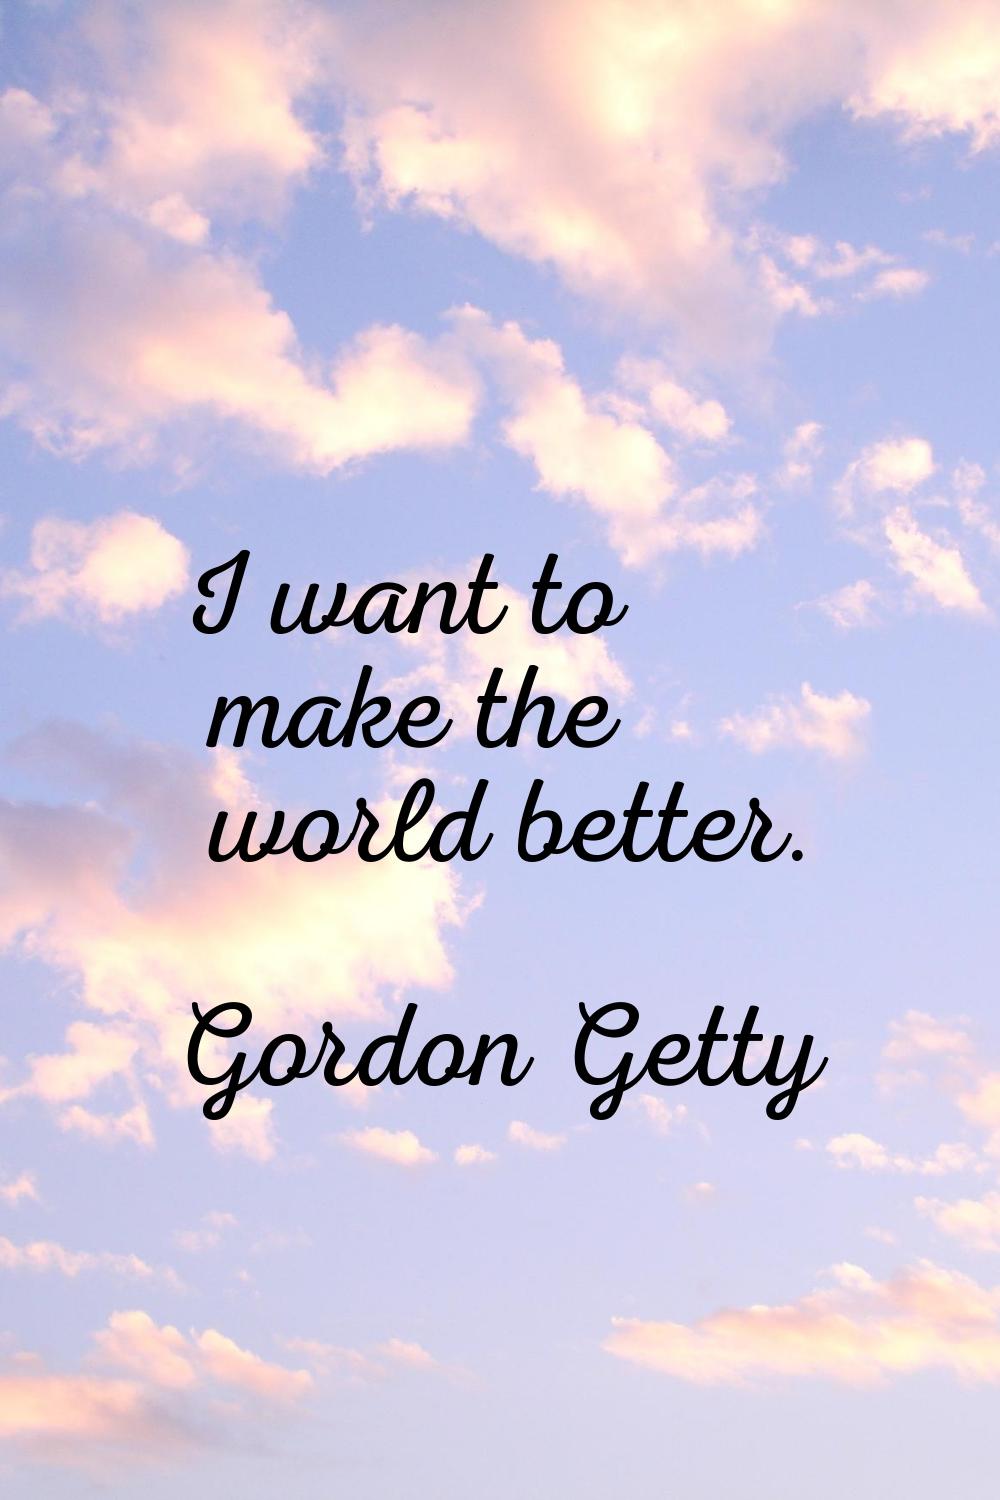 I want to make the world better.